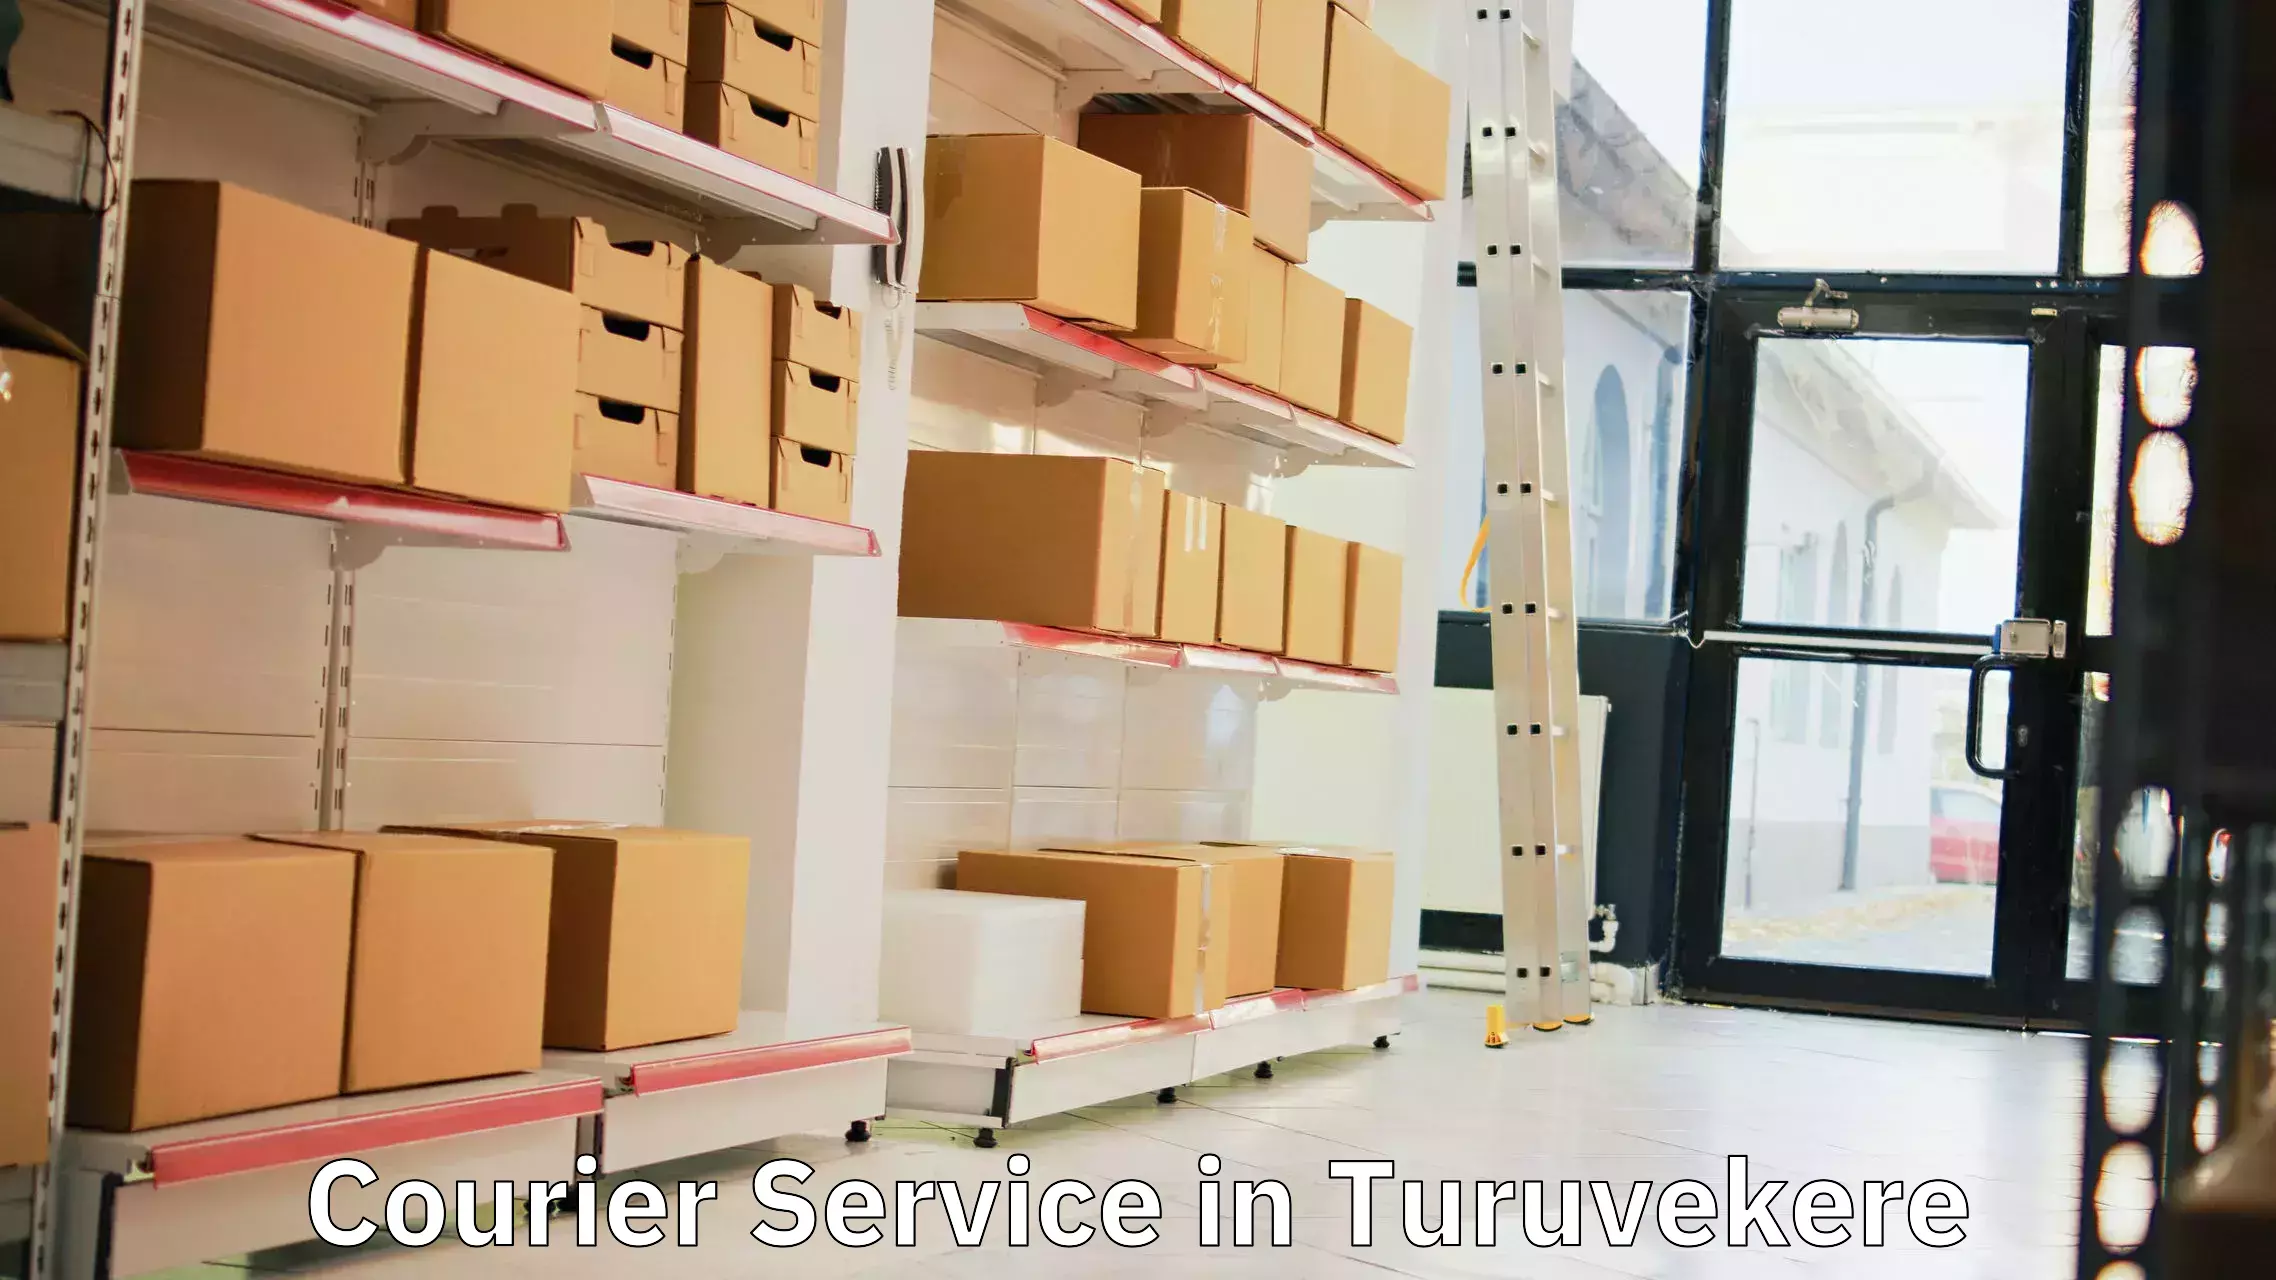 Same-day delivery solutions in Turuvekere